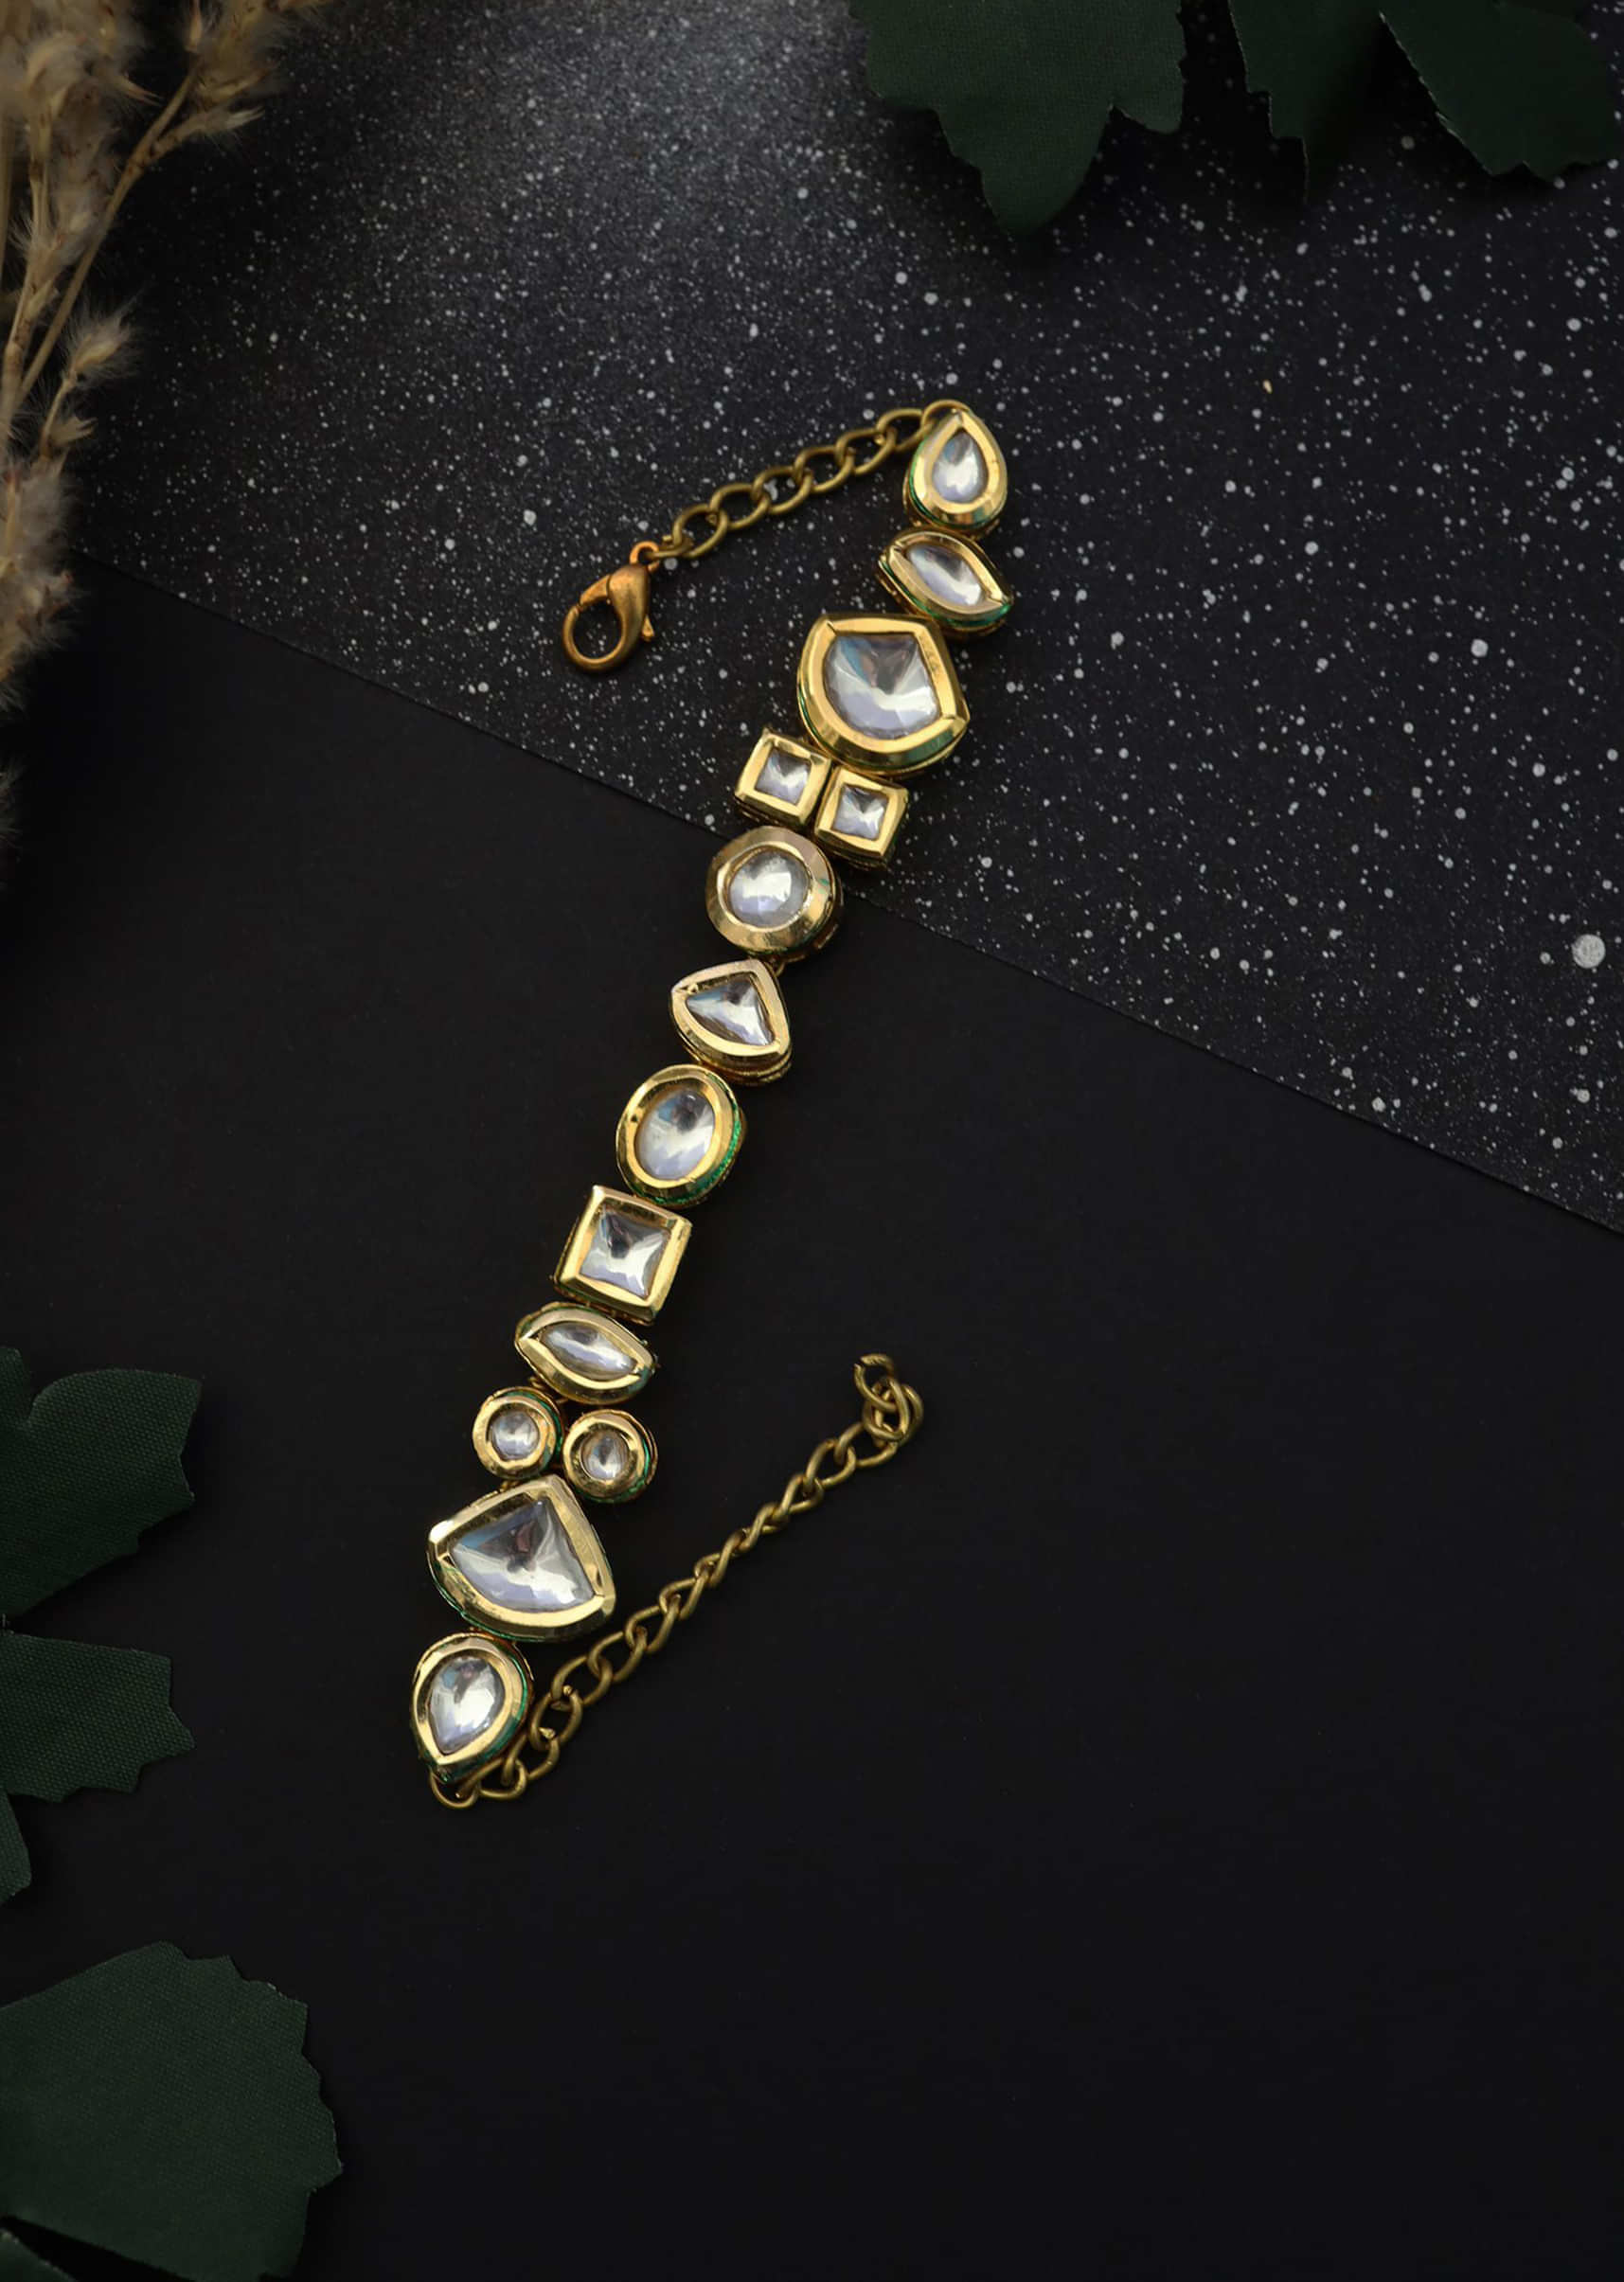 Gold Bracelet With Kundan Assembled In An Opulent Design By Paisley Pop